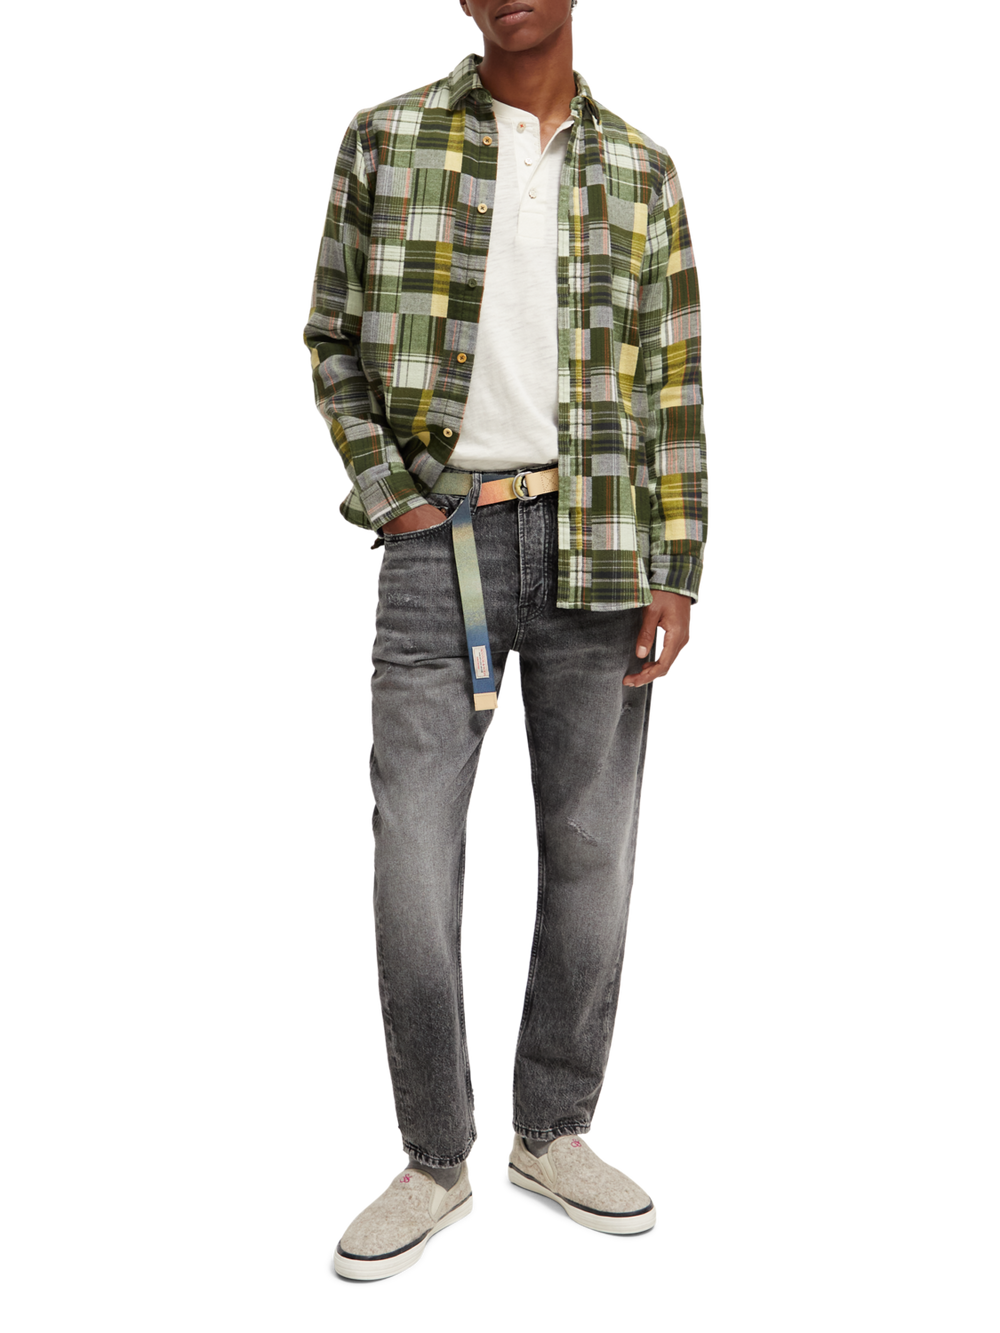 Flannel Check Shirt in Green Check | Buster McGee